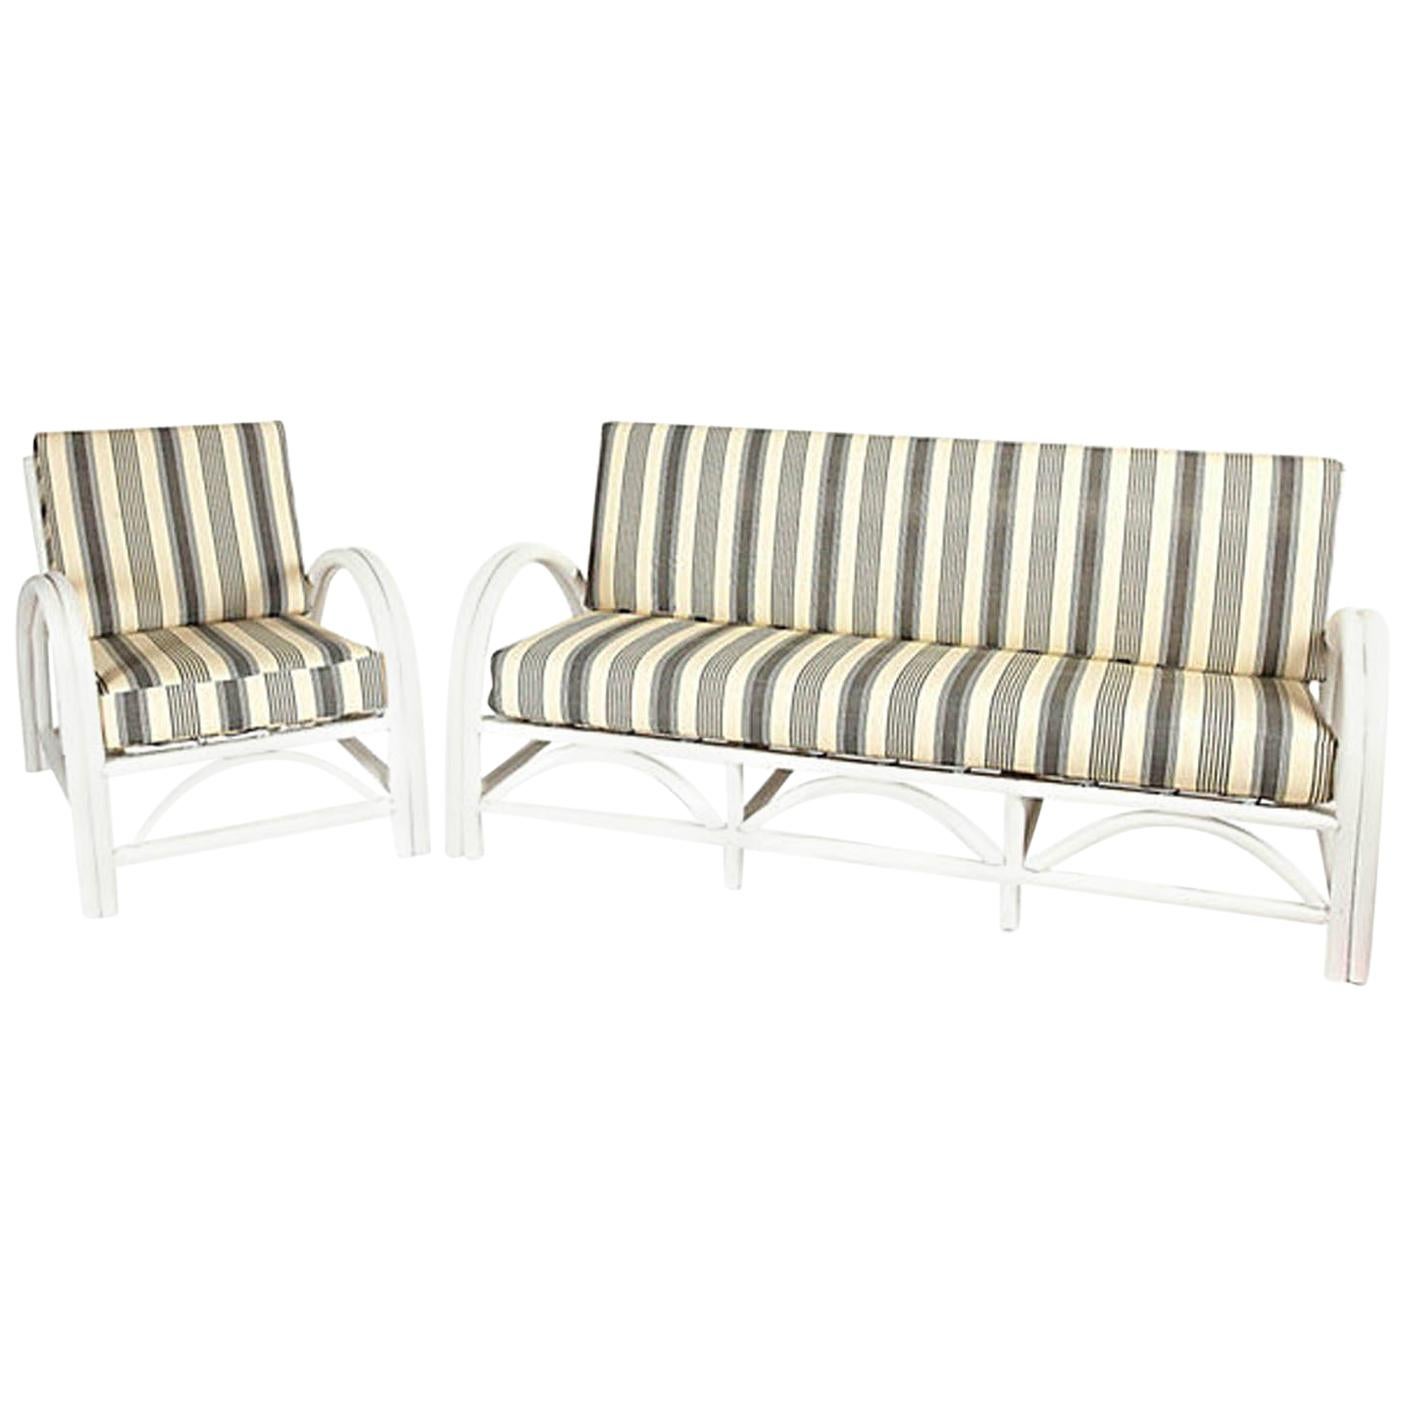 Bentwood Porch or Patio Sofa and Chair